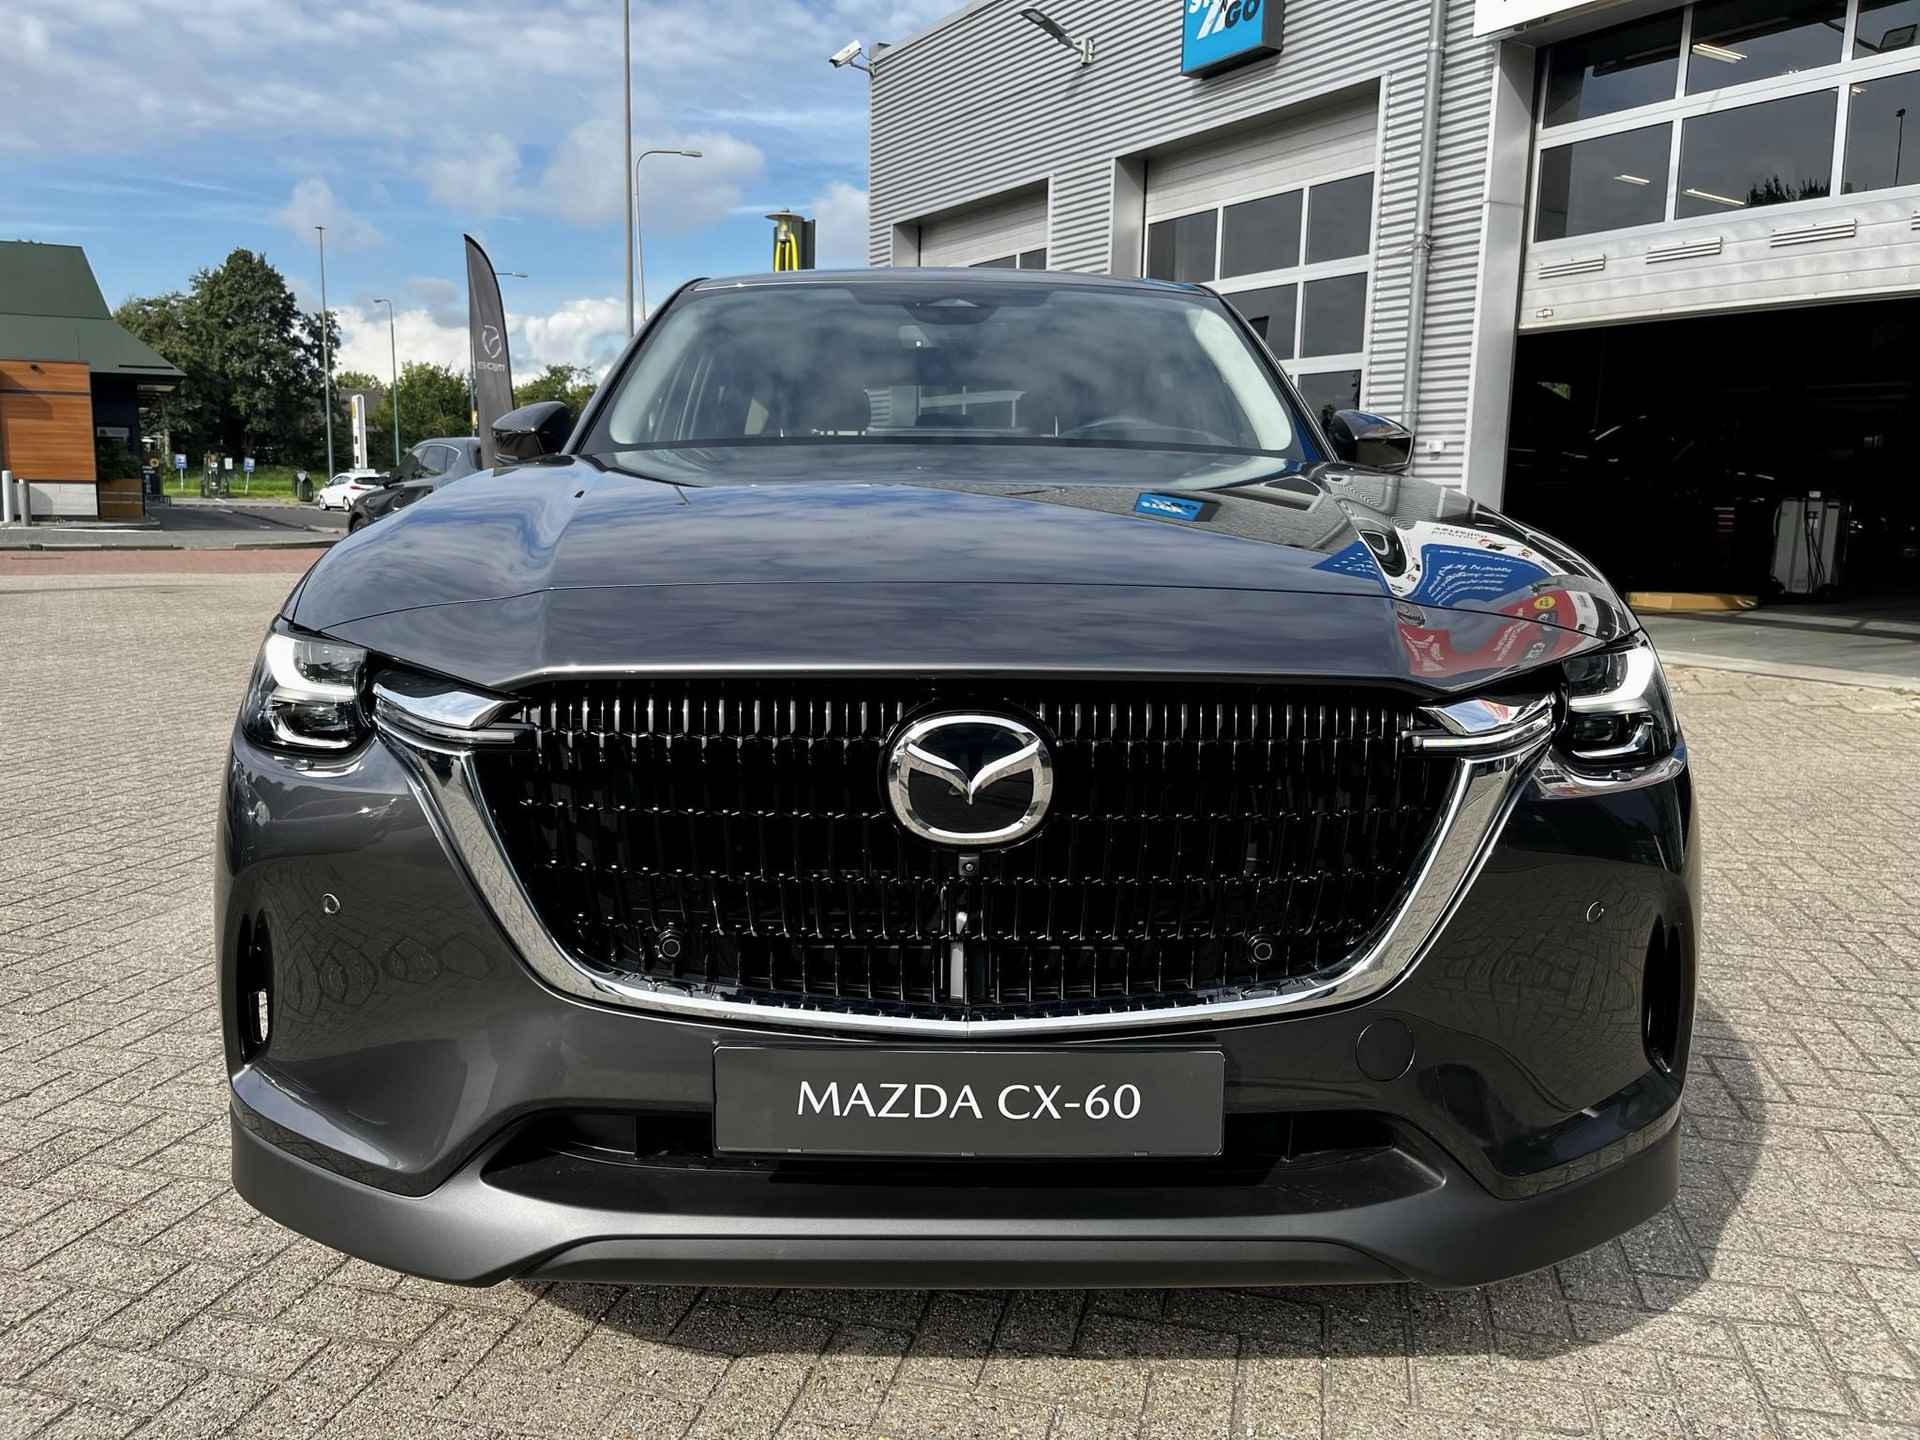 Mazda CX-60 2.5 e-SkyActiv PHEV Exclusive-Line + Convenience & Sound pack + Driver Assistance Pack - 9/43